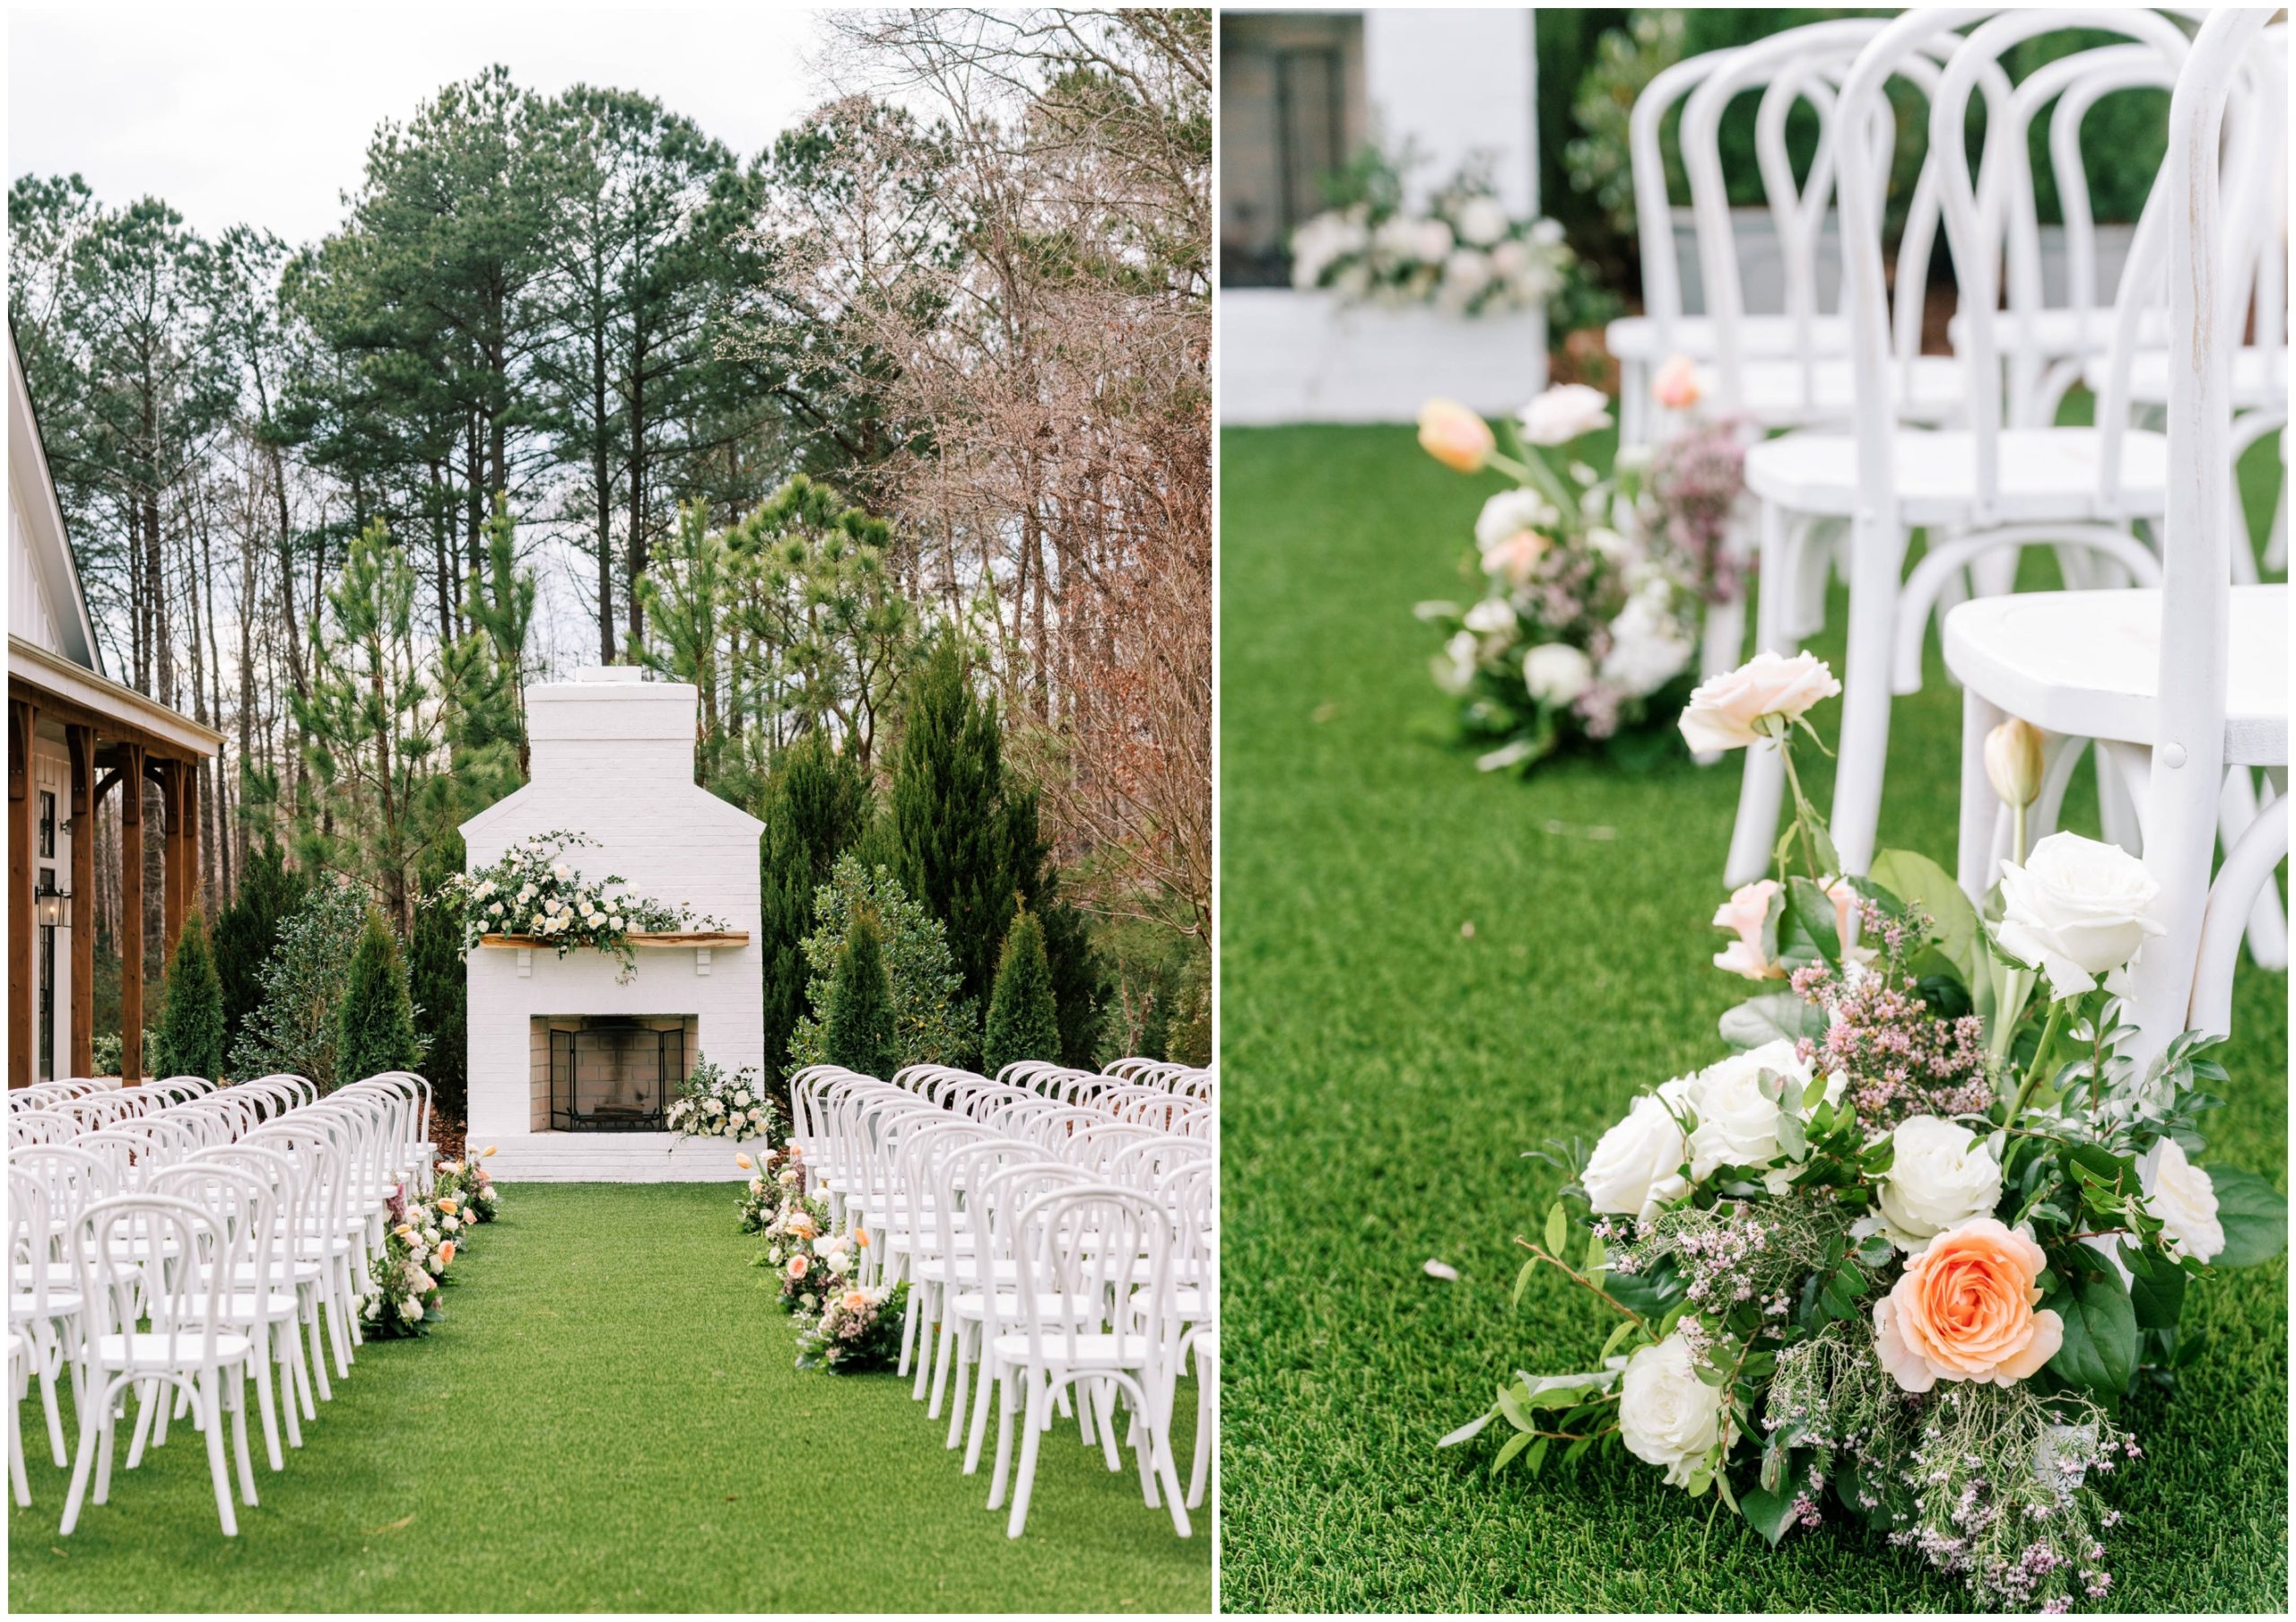 White cafe seating and white and peach florals for a spring outdoor wedding ceremony